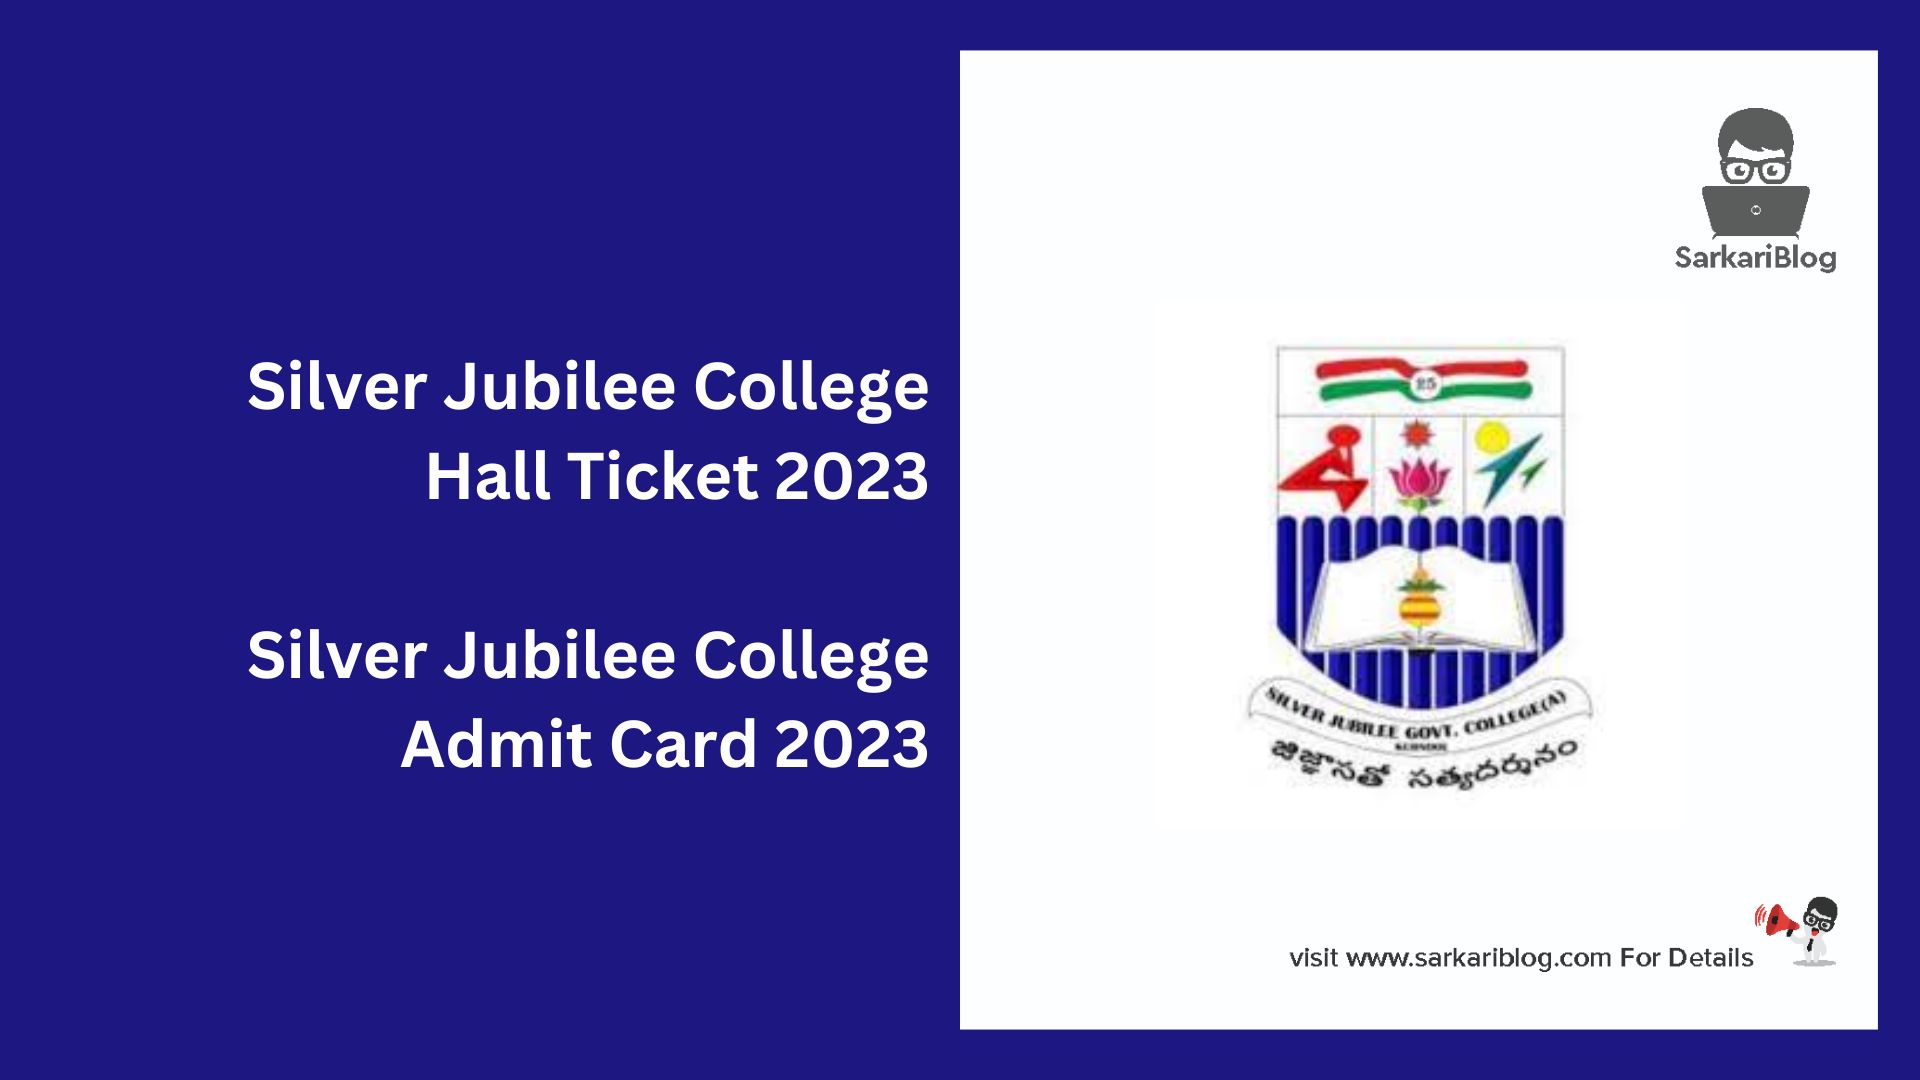 Silver Jubilee College Hall Ticket 2023